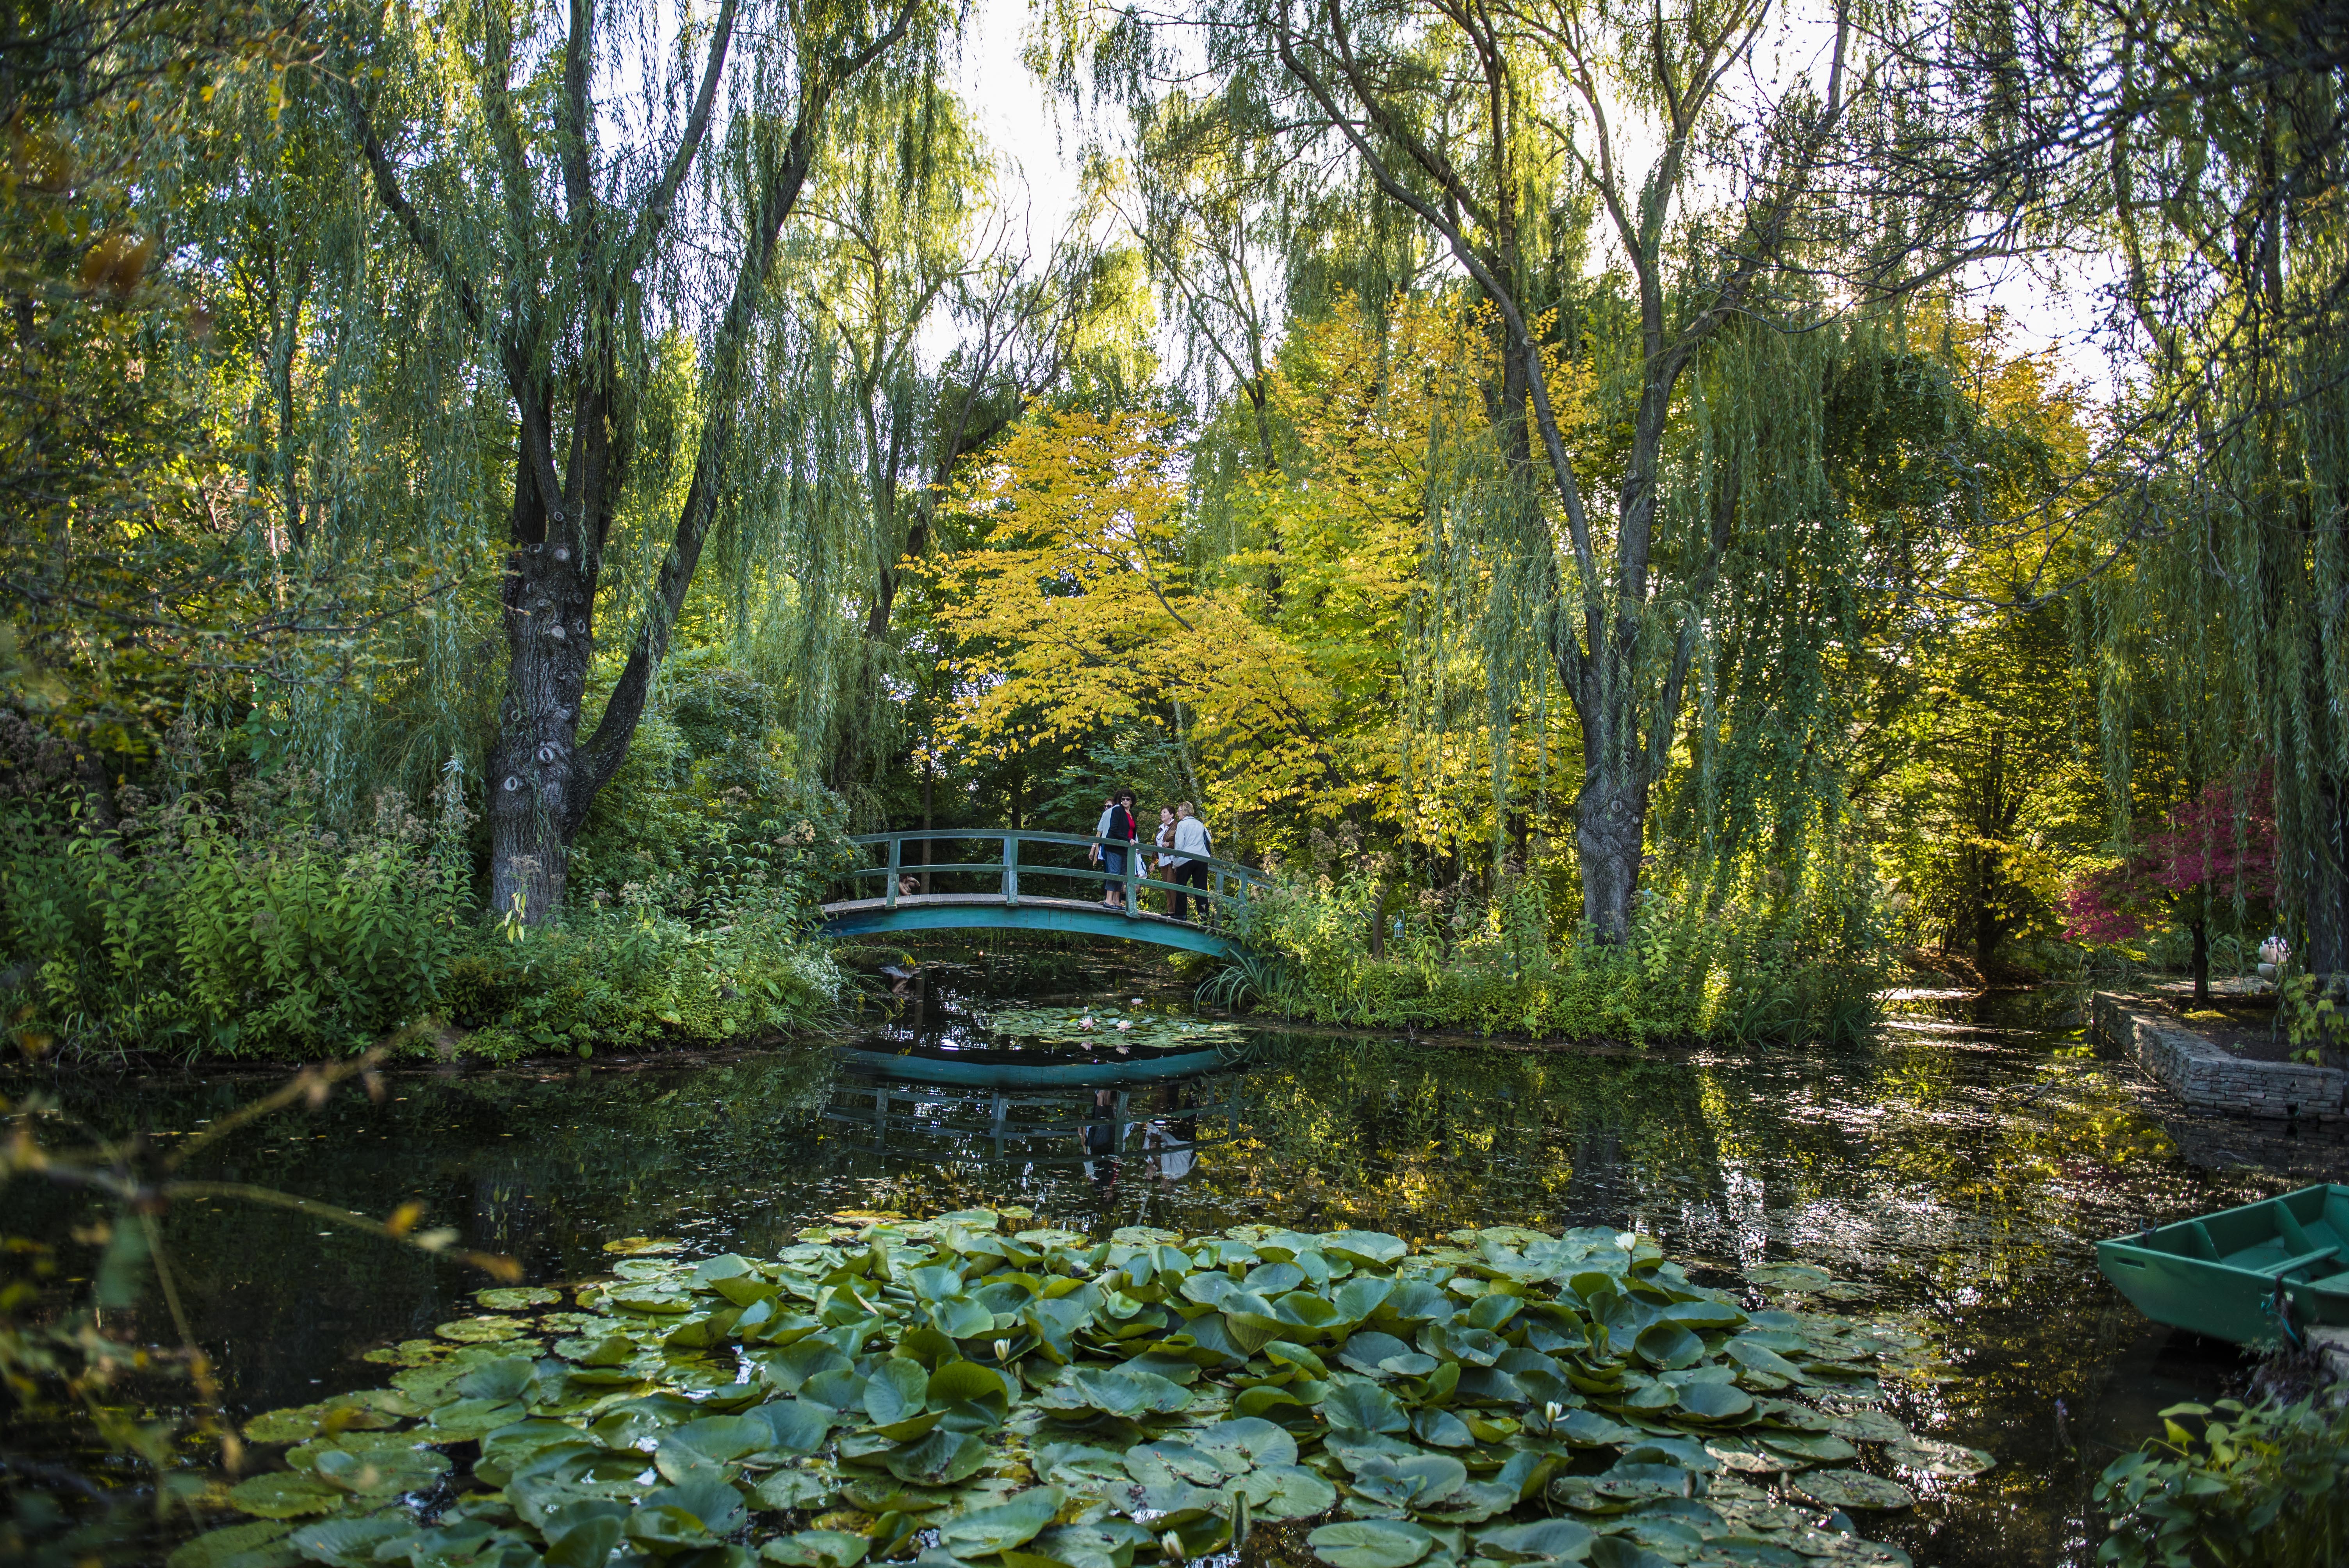 a small lake covered with lilies floating on the water with a green wooden bridge crossing over